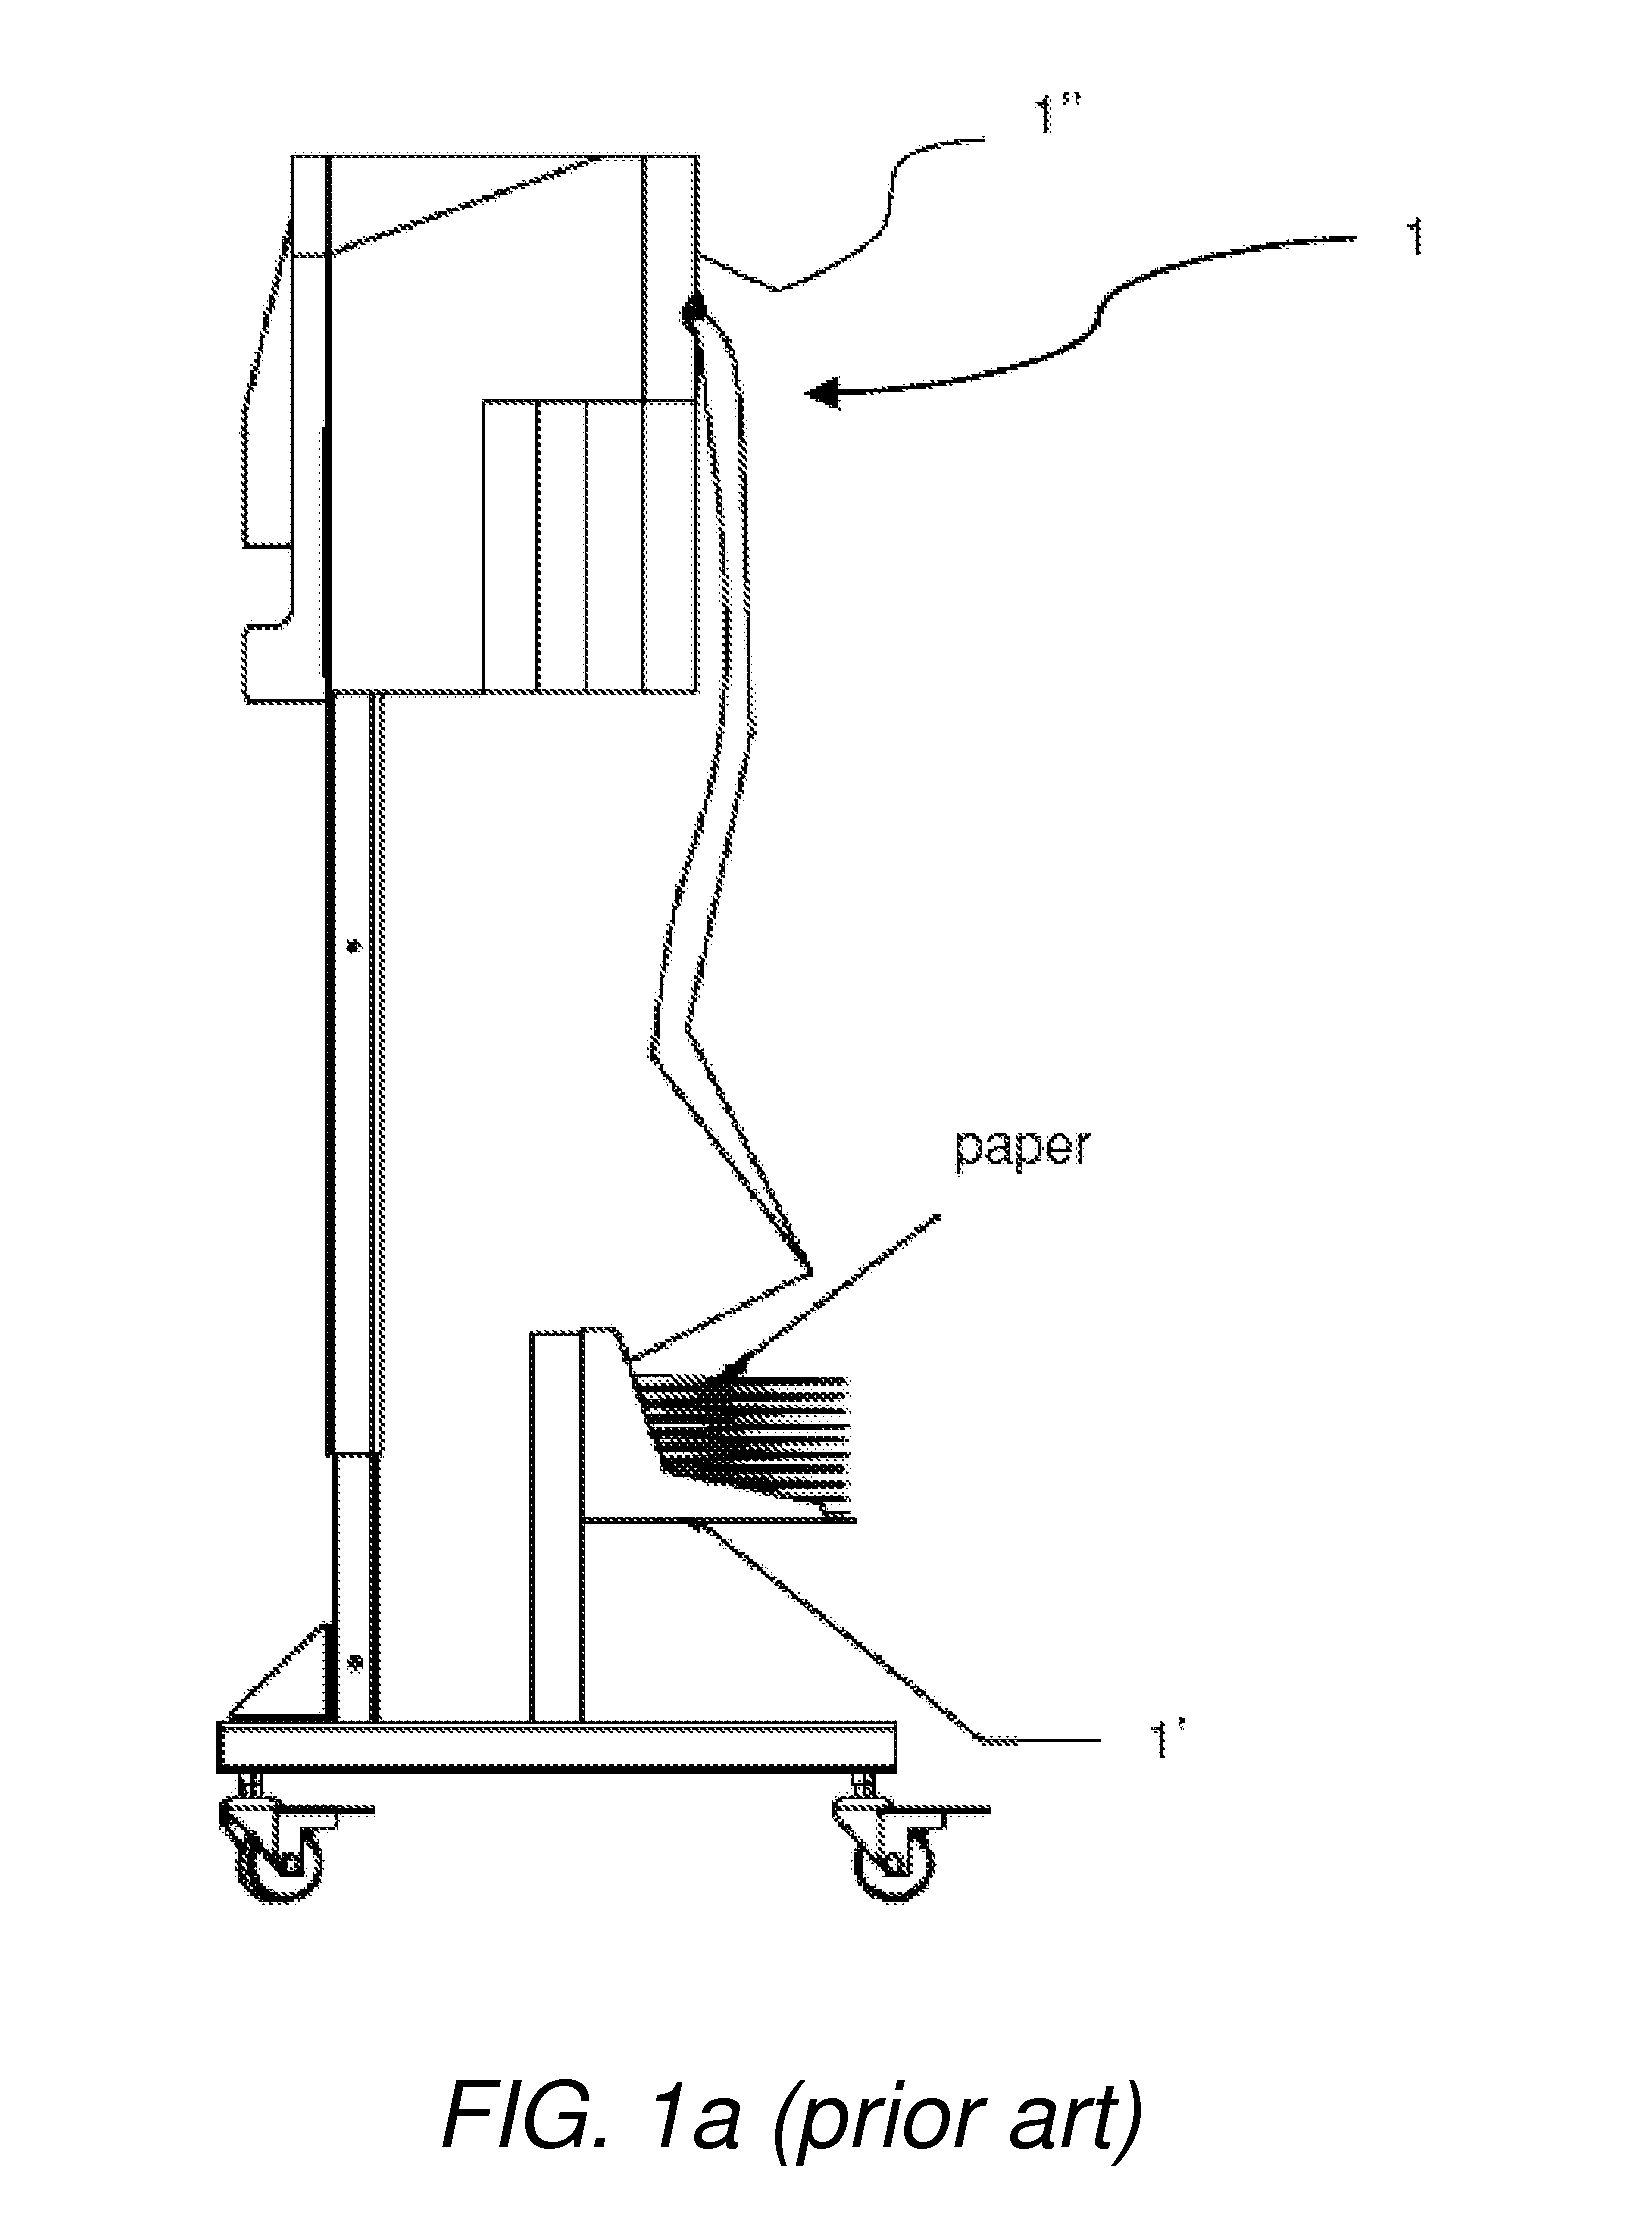 Apparatus, systems and methods for configuring/ feeding sheet stock material for a dunnage system and for generating upright edge dunnage strips